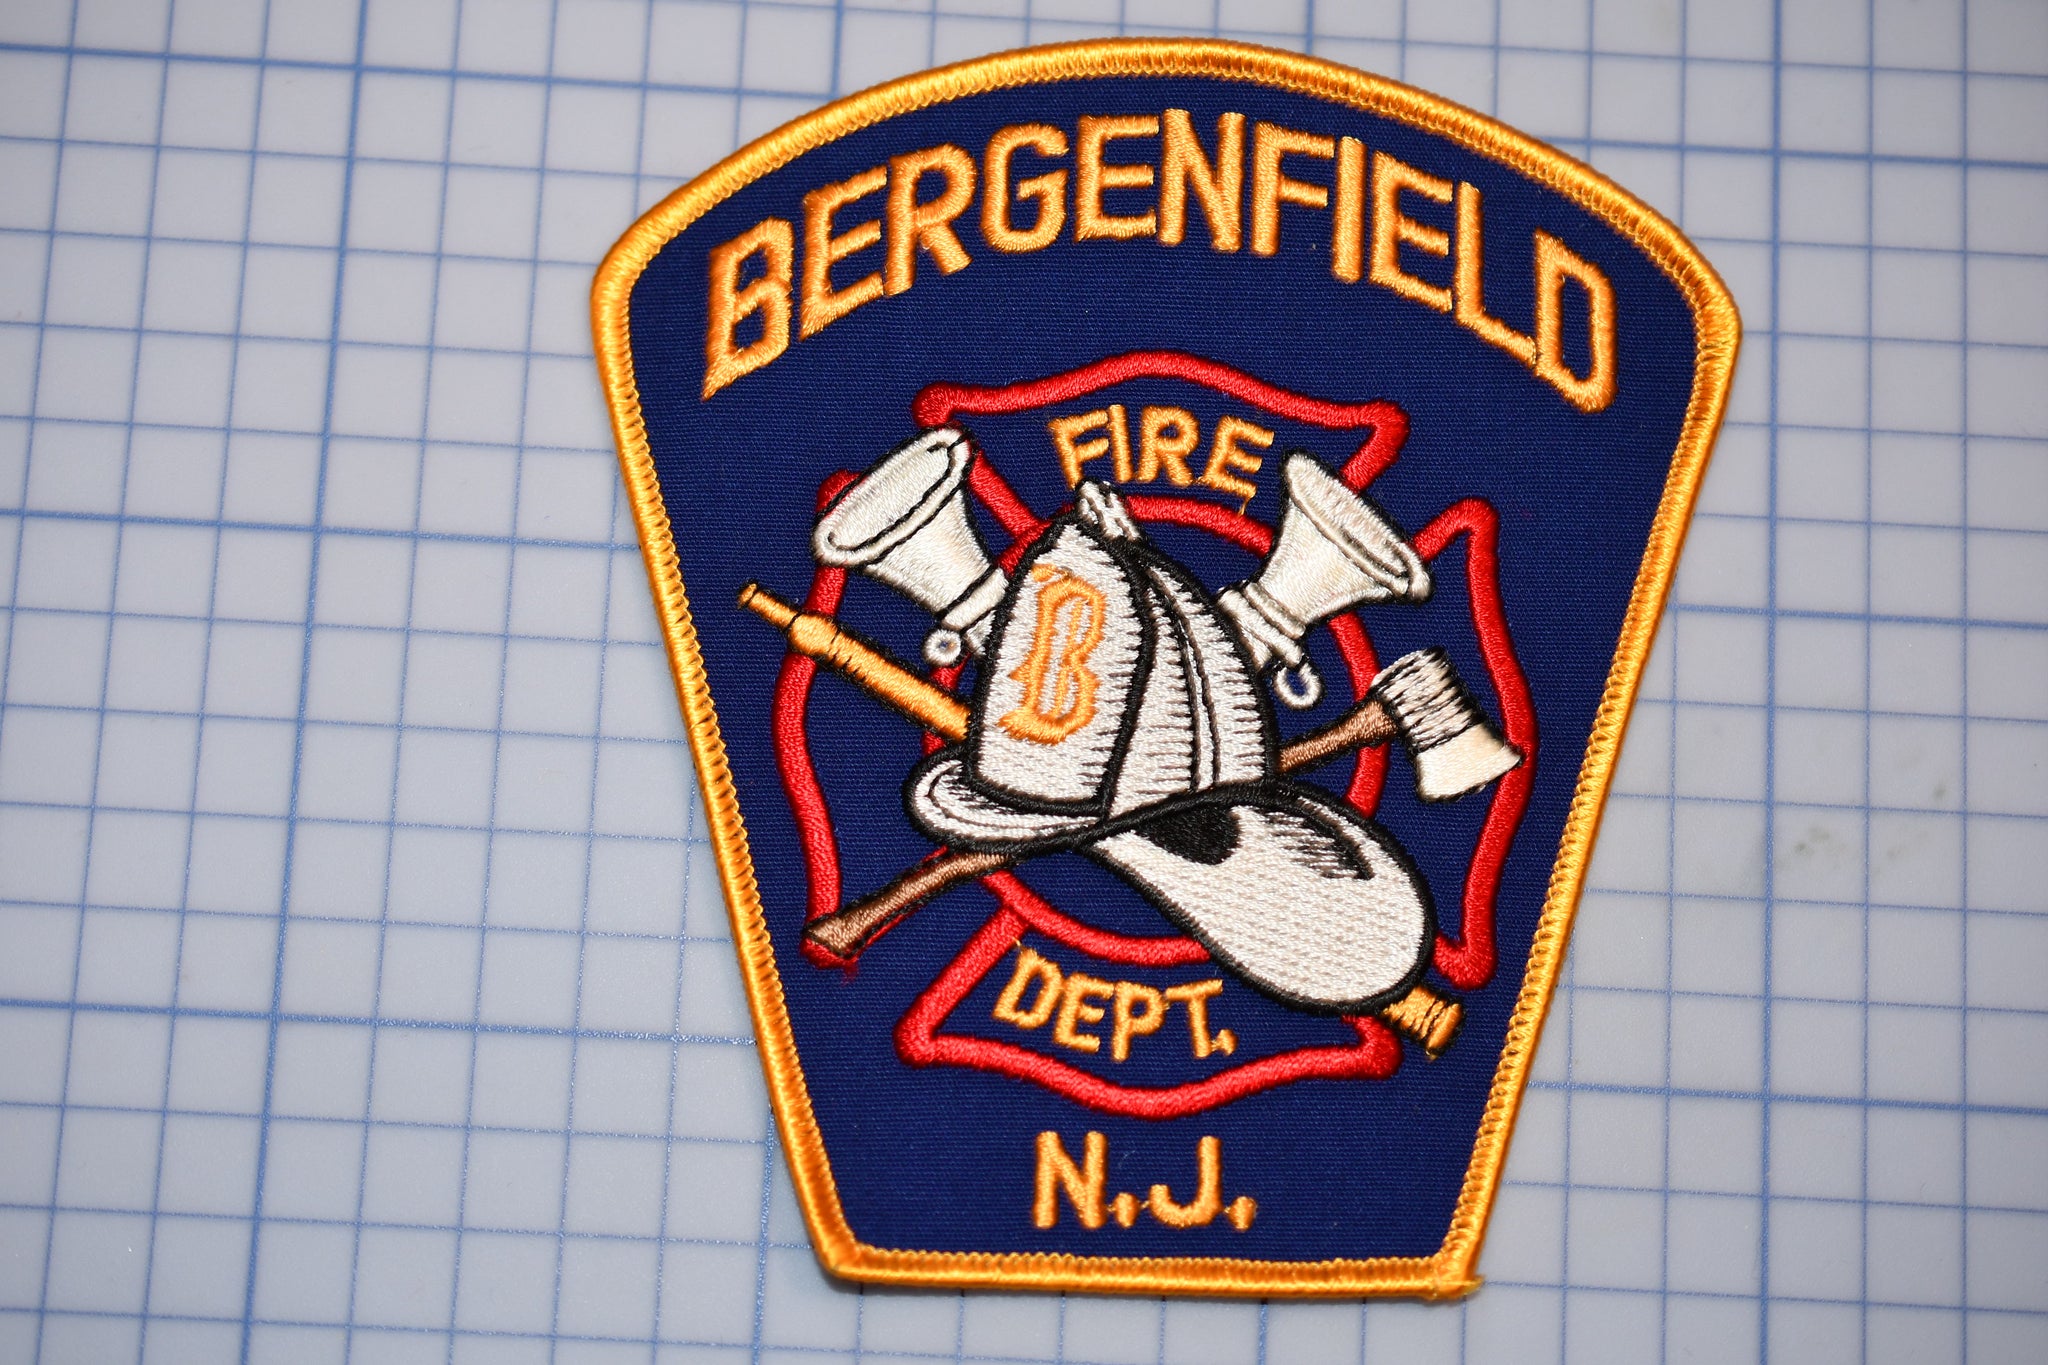 Bergenfield New Jersey Fire Department Patch (B29-364)